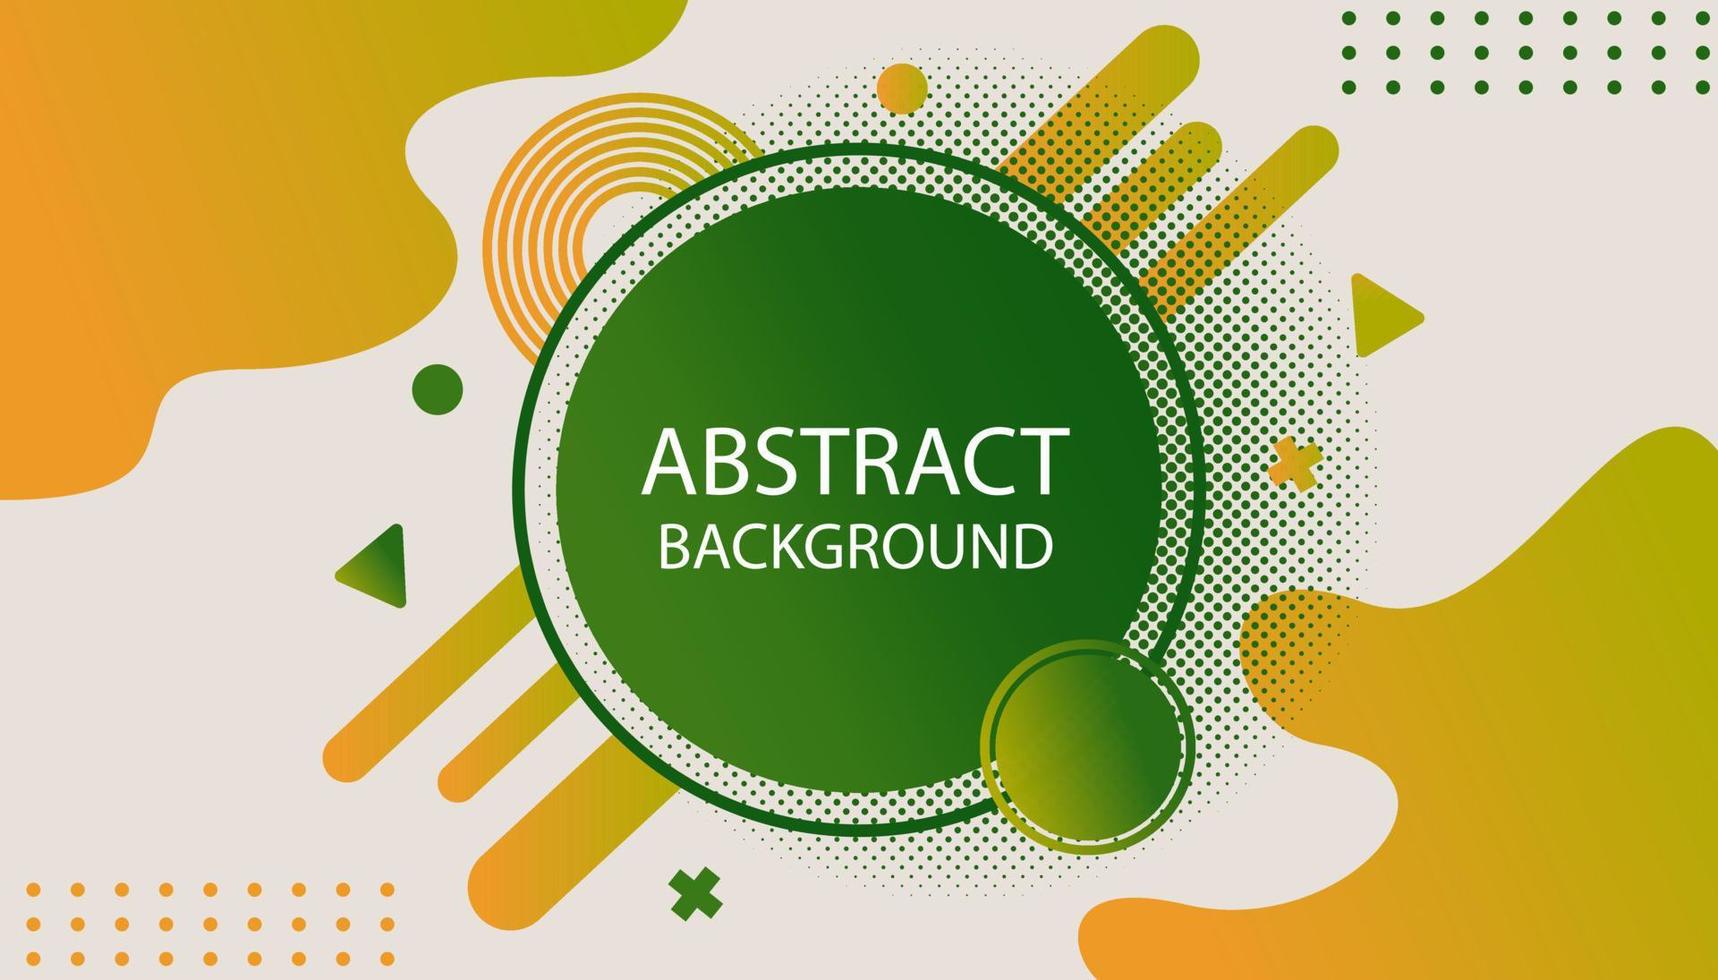 abstract background poster with simple shape and figure. Abstract vector pattern design for web banner, business presentation,